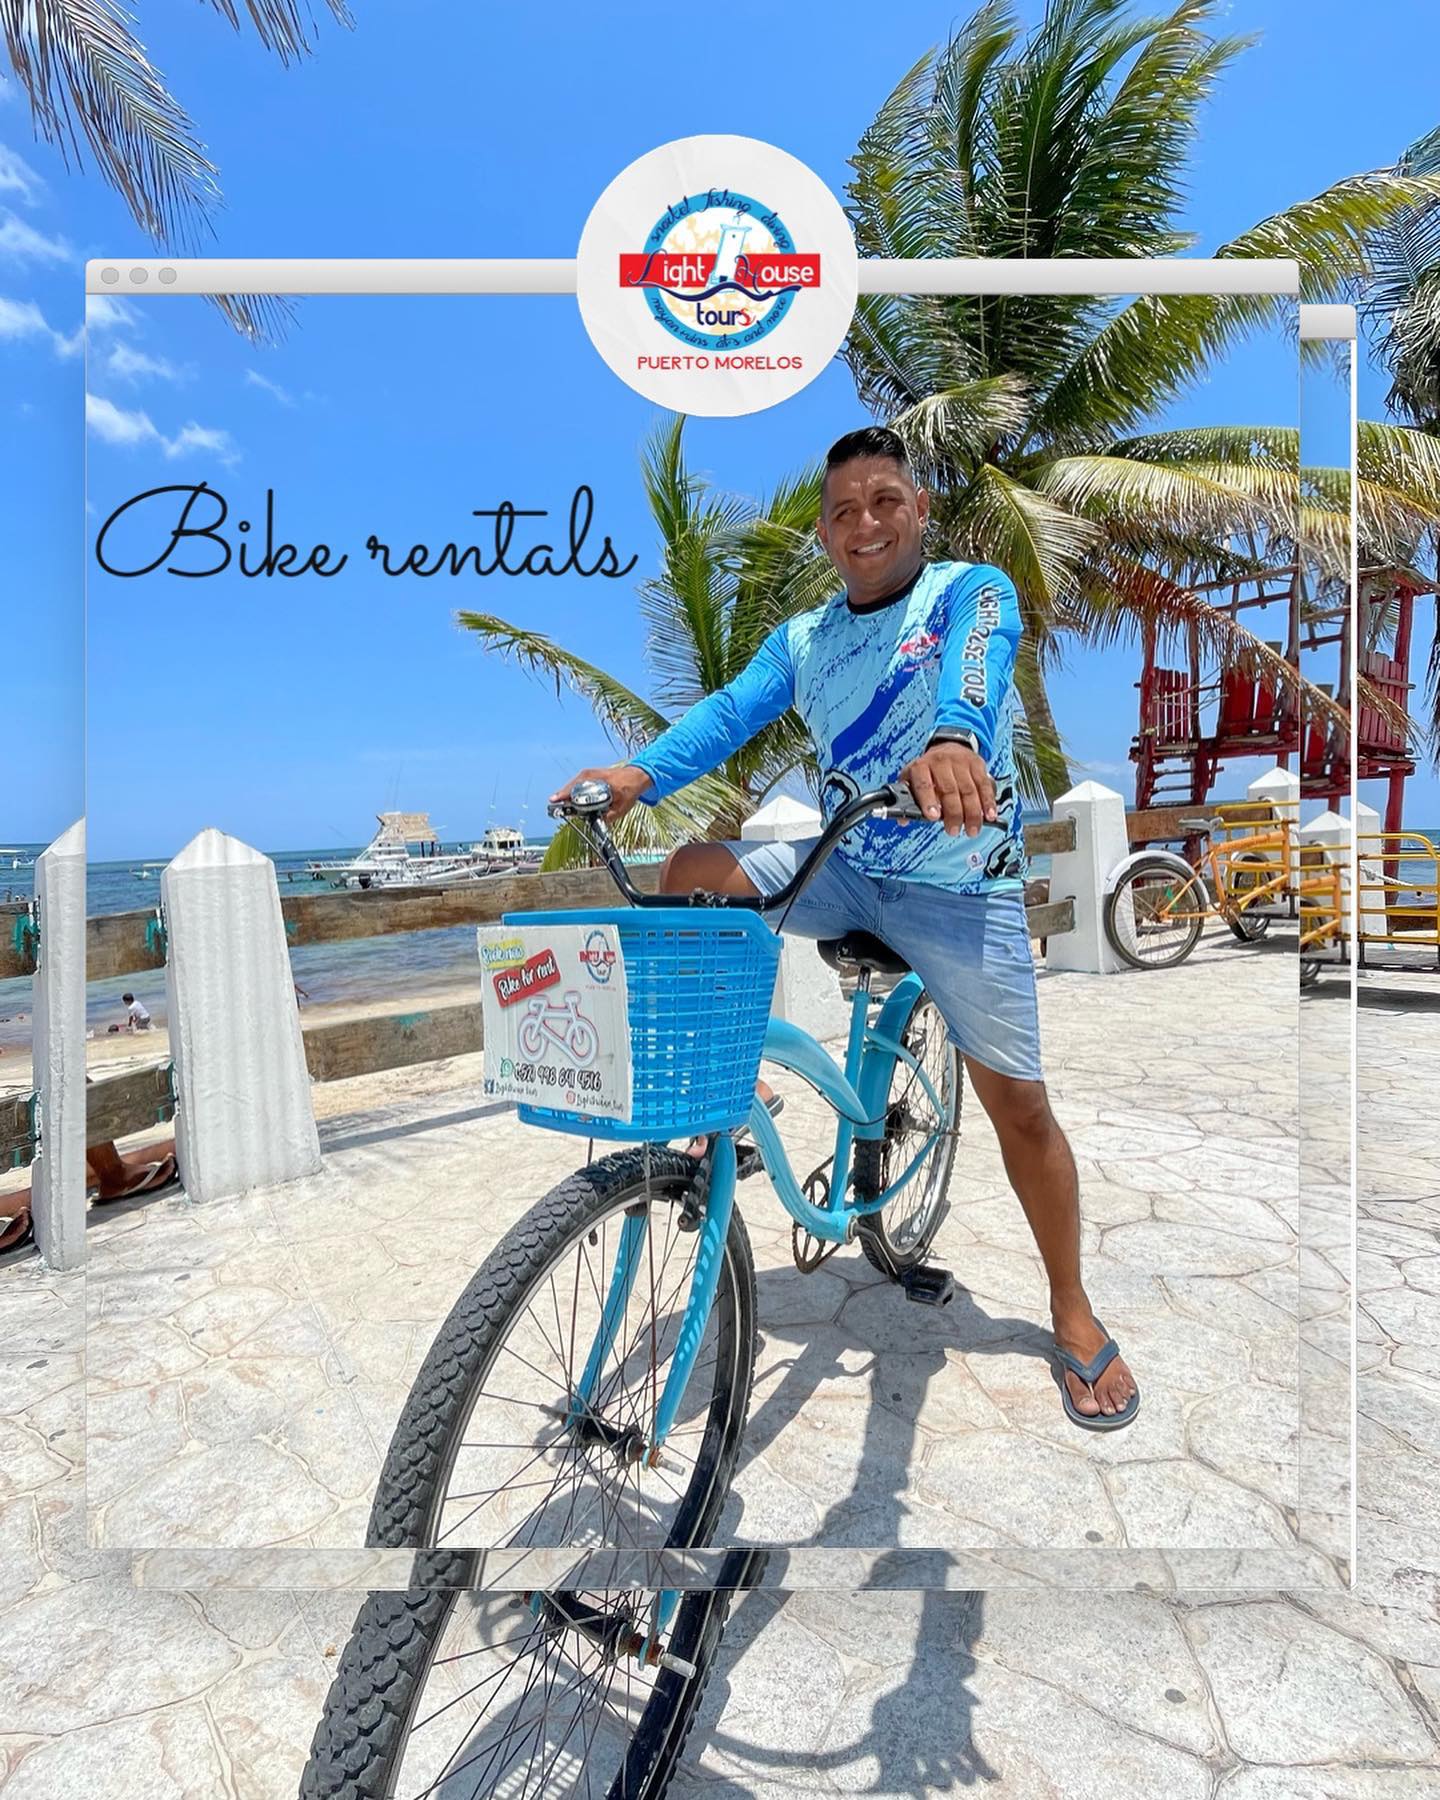 Image of 2 blue bicycles with signs indicating that you can rent them from Lighthouse Tours in Puerto Morelos.